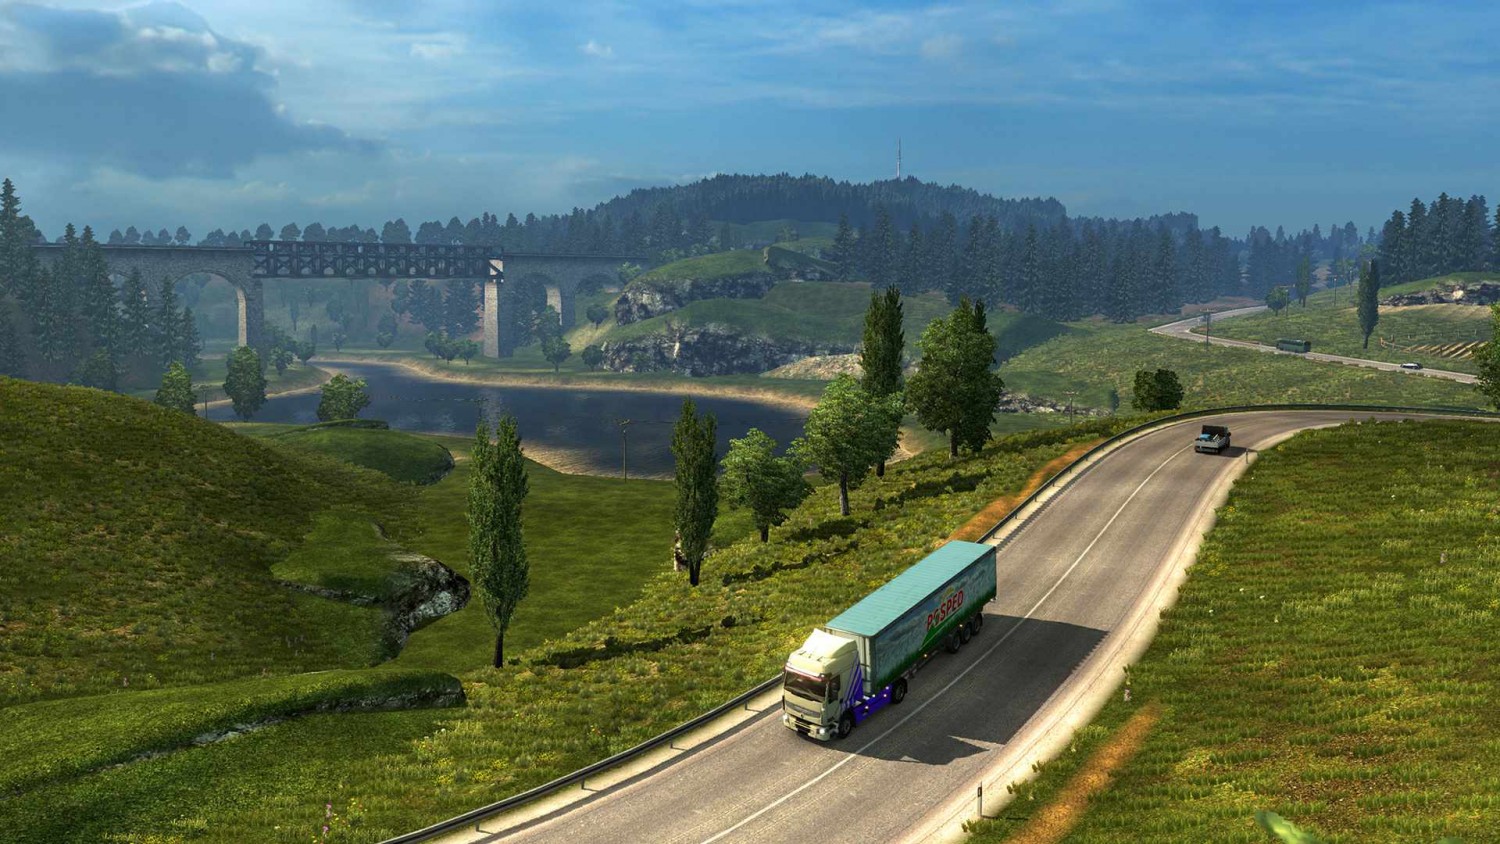 Euro truck simulator 2 free download cracked games org